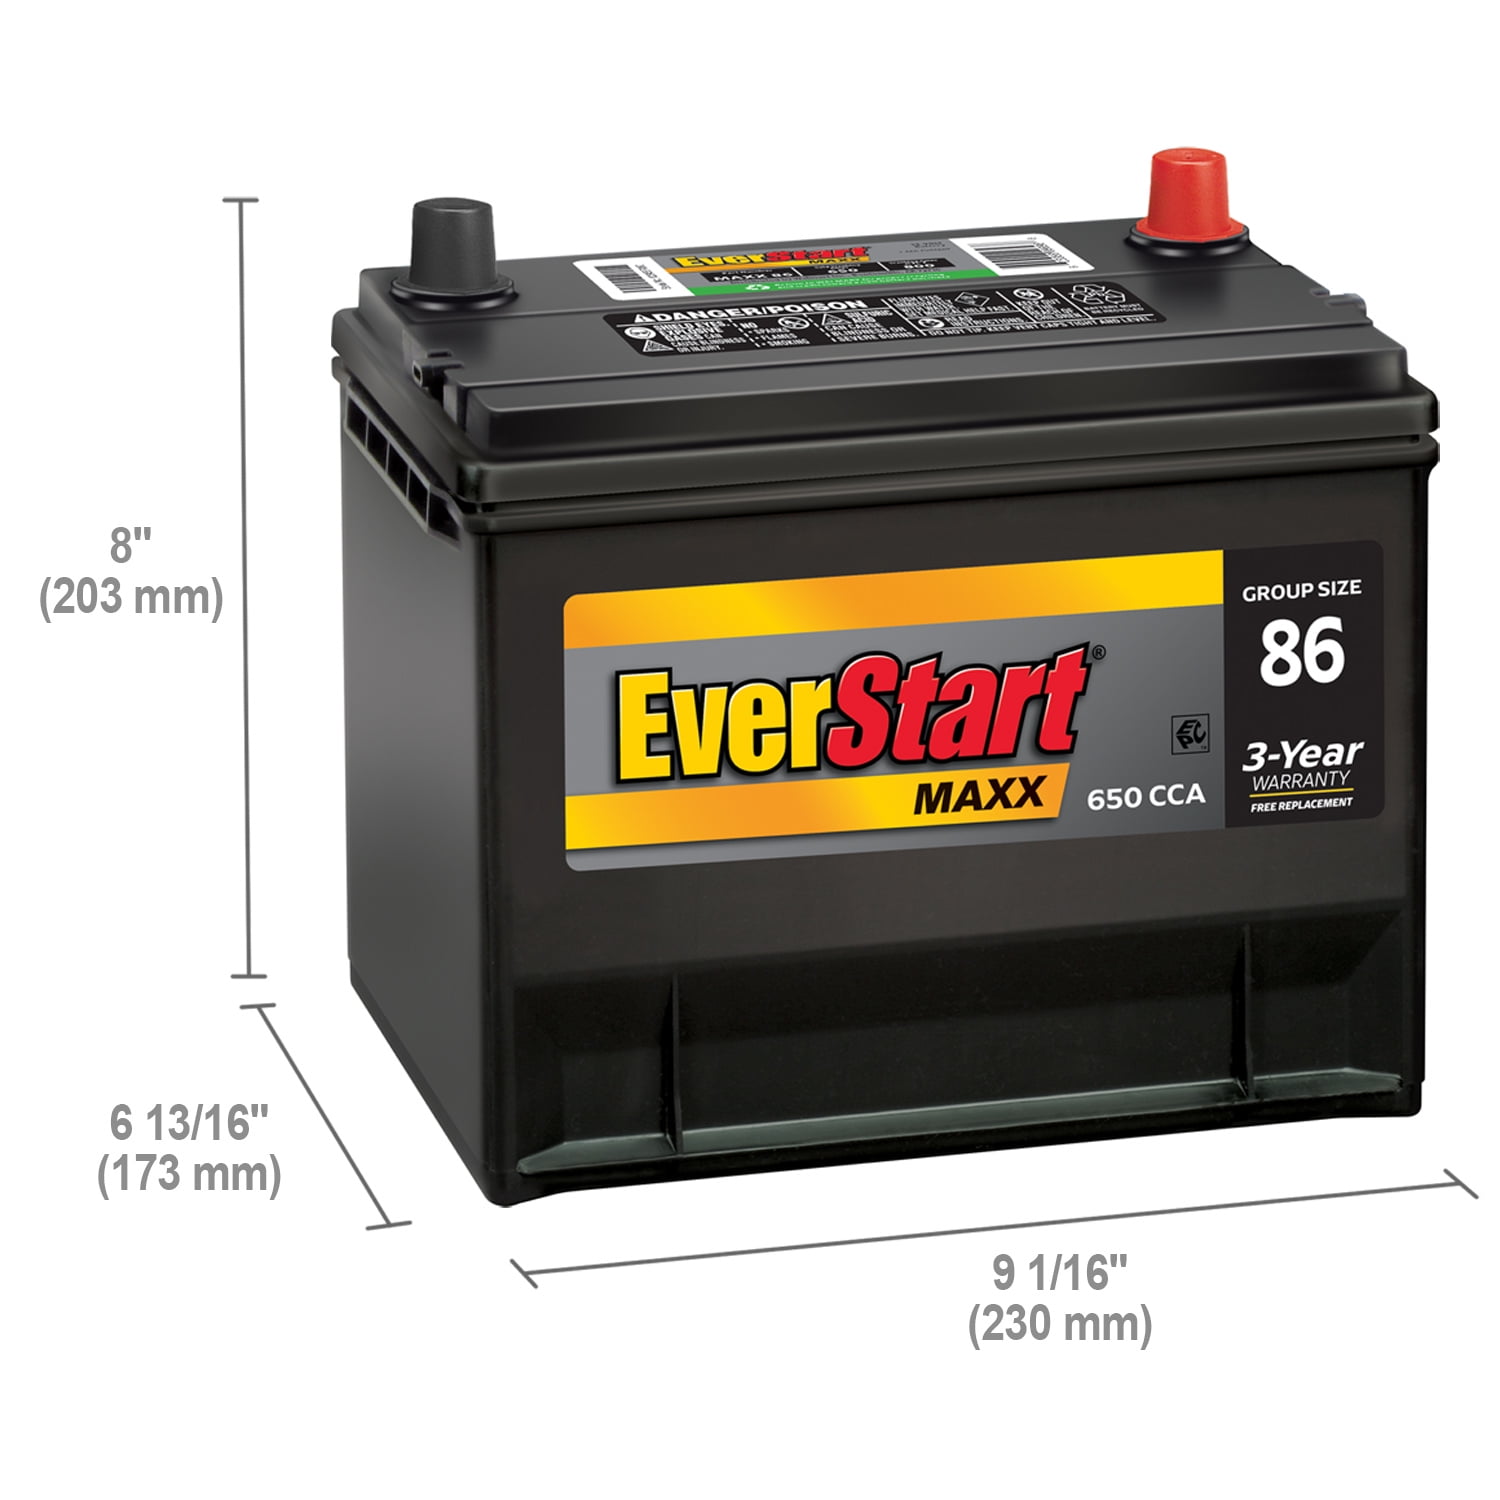 Evolution of the Car Battery, Large and Small